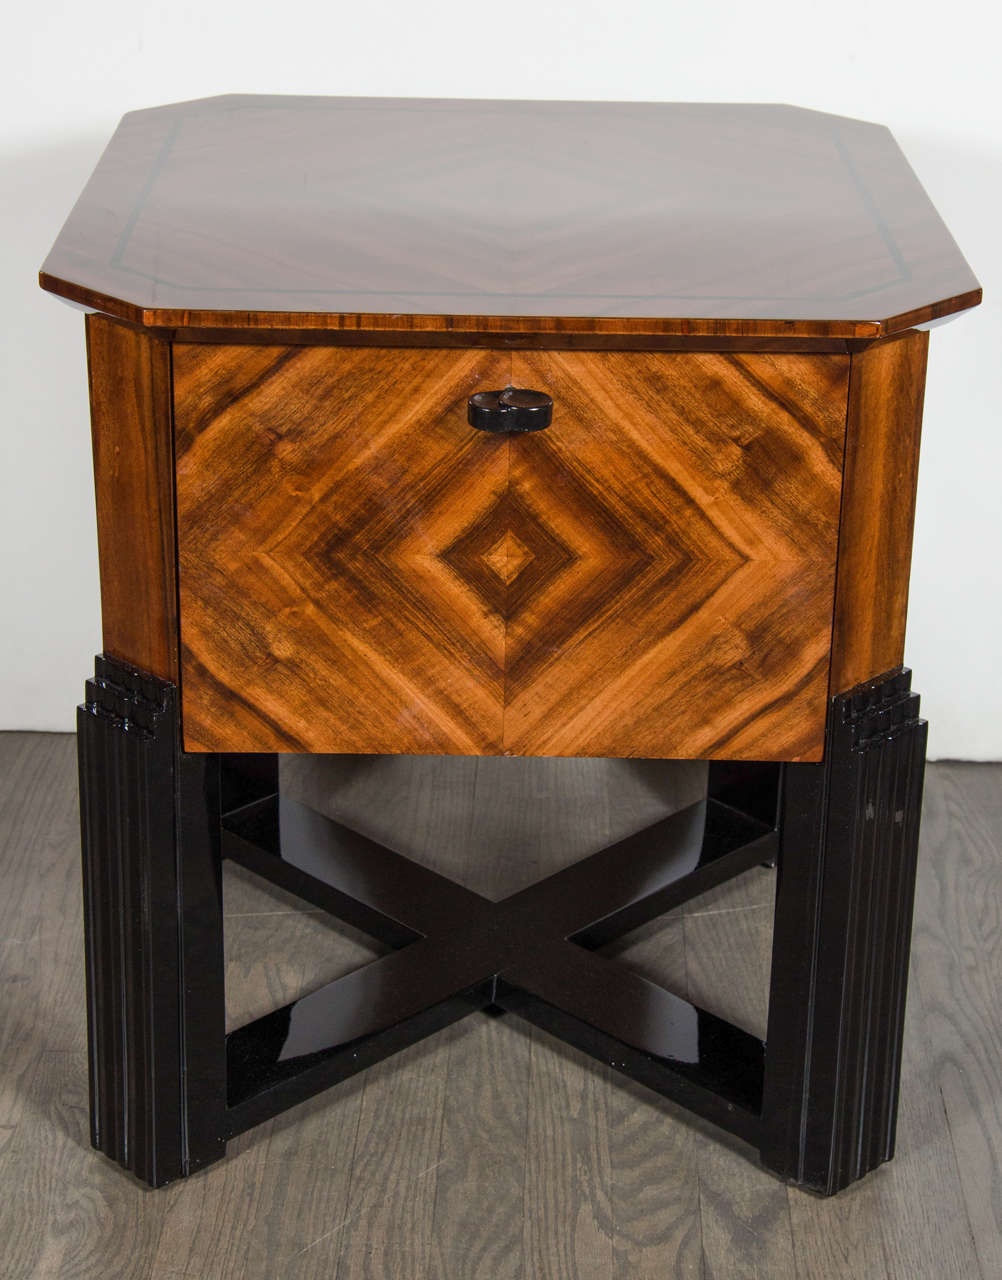 This impressive Art Deco bar table features four drop-down doors which open to reveal the interior space inside. The book-matched walnut is inlaid to create symmetrically geometric designs on all surfaces for both the interior and exterior. The